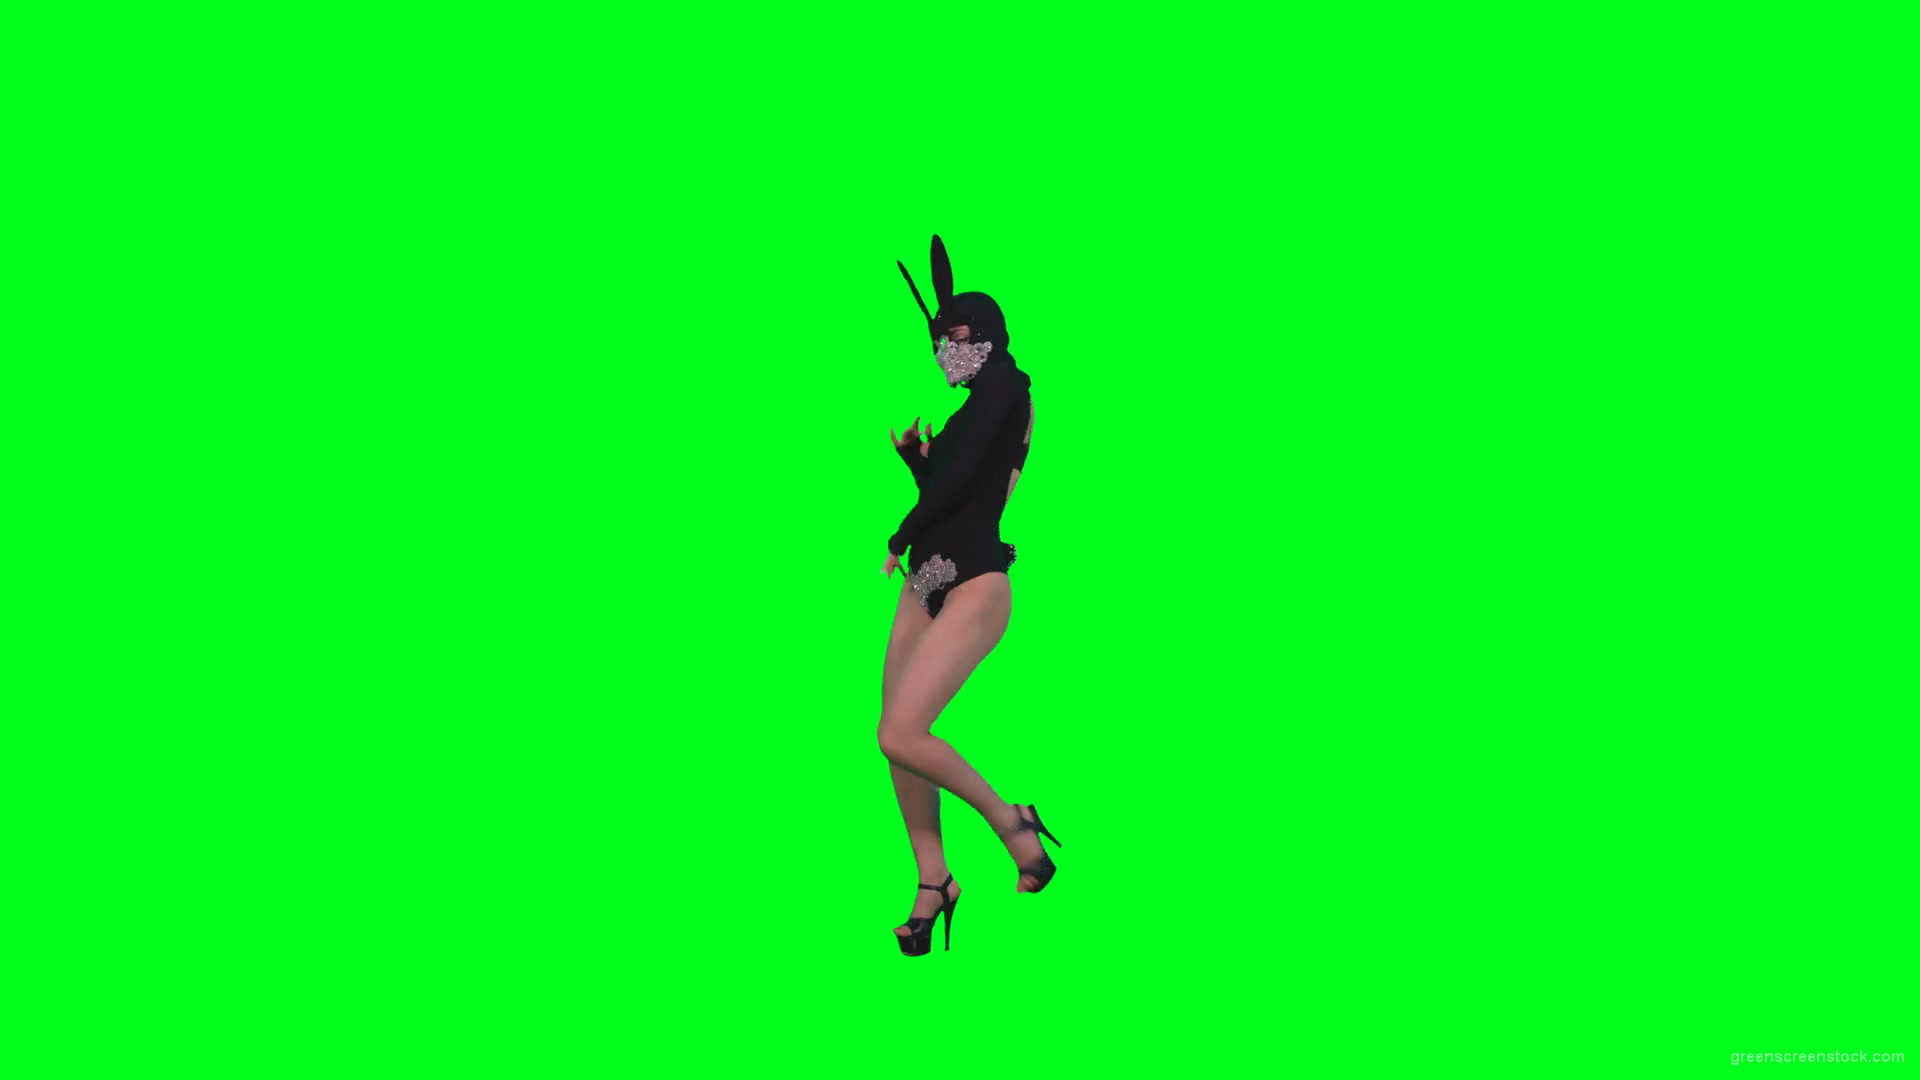 Girl-in-Black-Bunny-Costume-squatting-in-go-go-style-isolated-on-green-screen-4K-Video-Footage-1-1920_007 Green Screen Stock